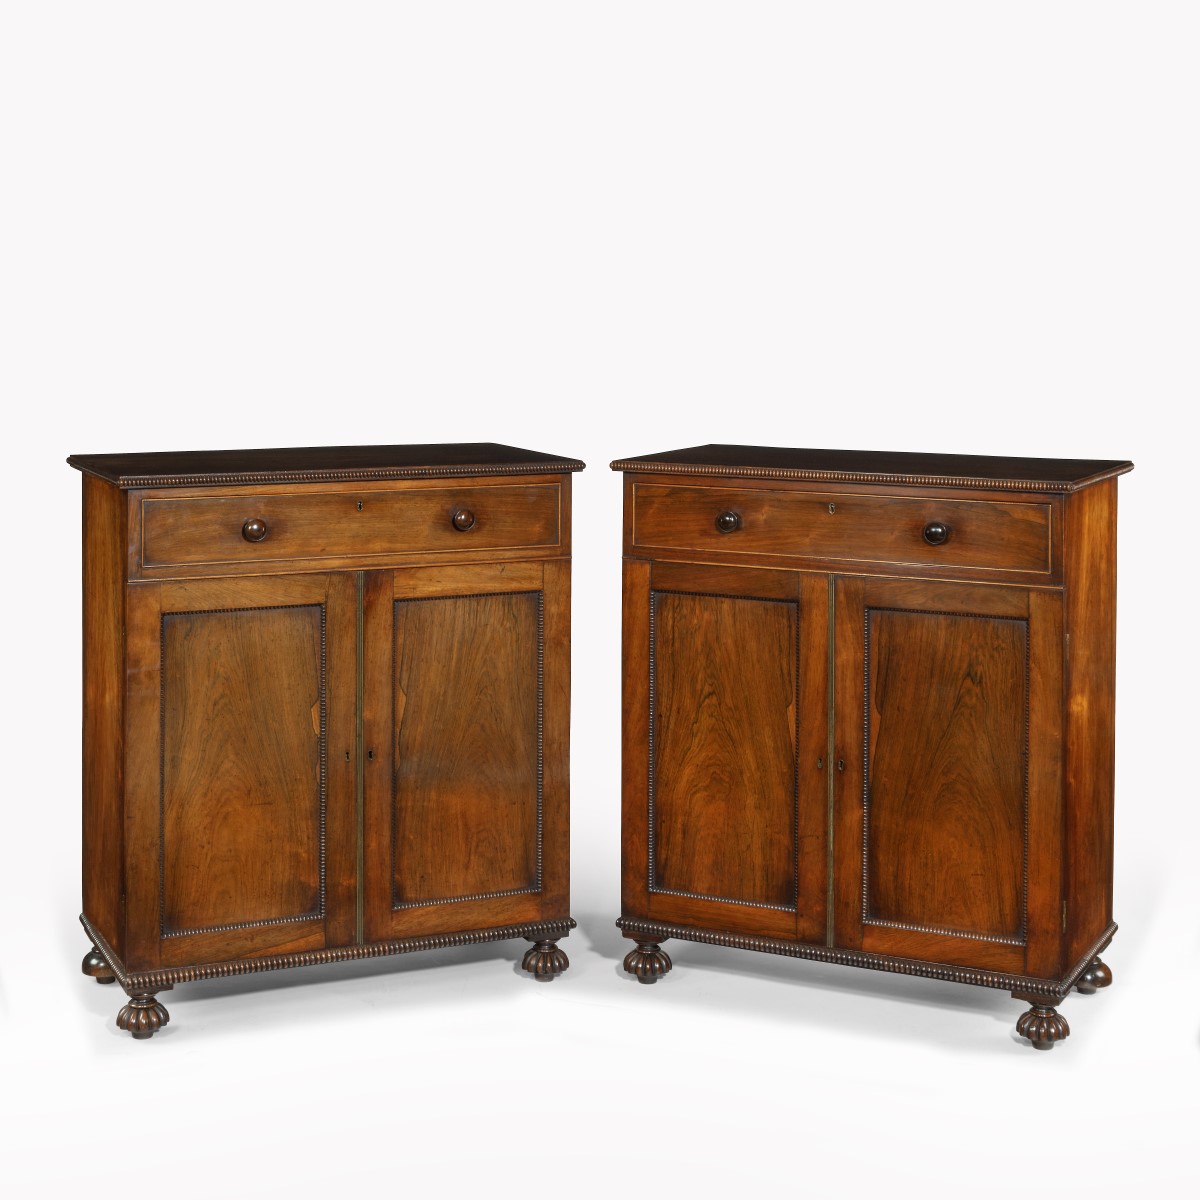 A pair of late Regency rosewood side cabinets, attributed to Gillows